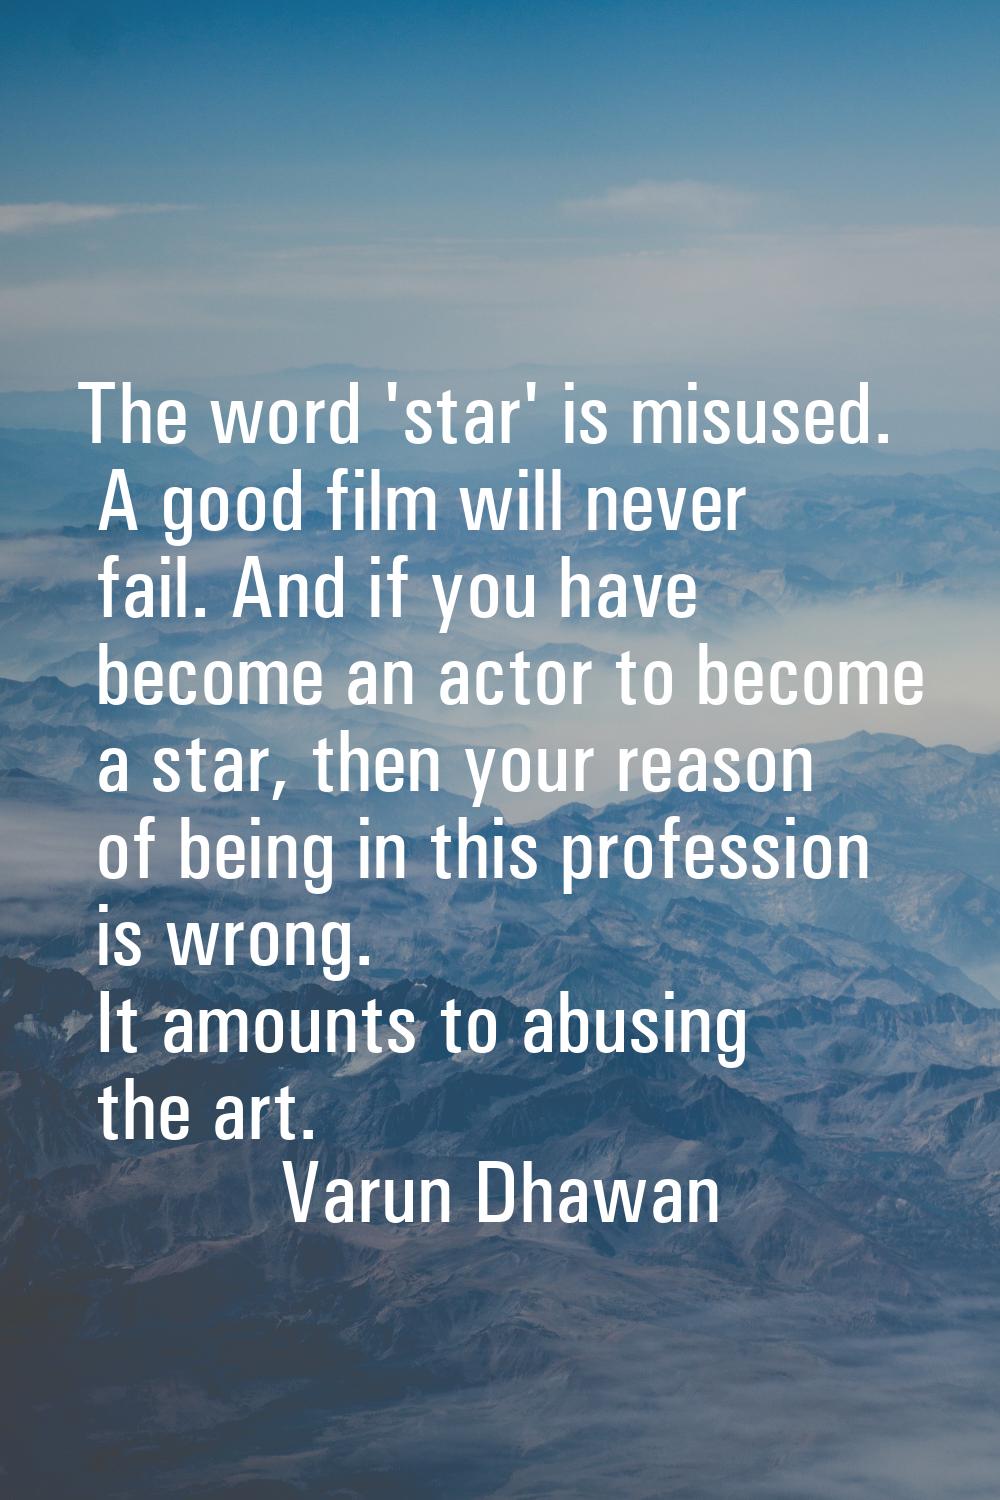 The word 'star' is misused. A good film will never fail. And if you have become an actor to become 